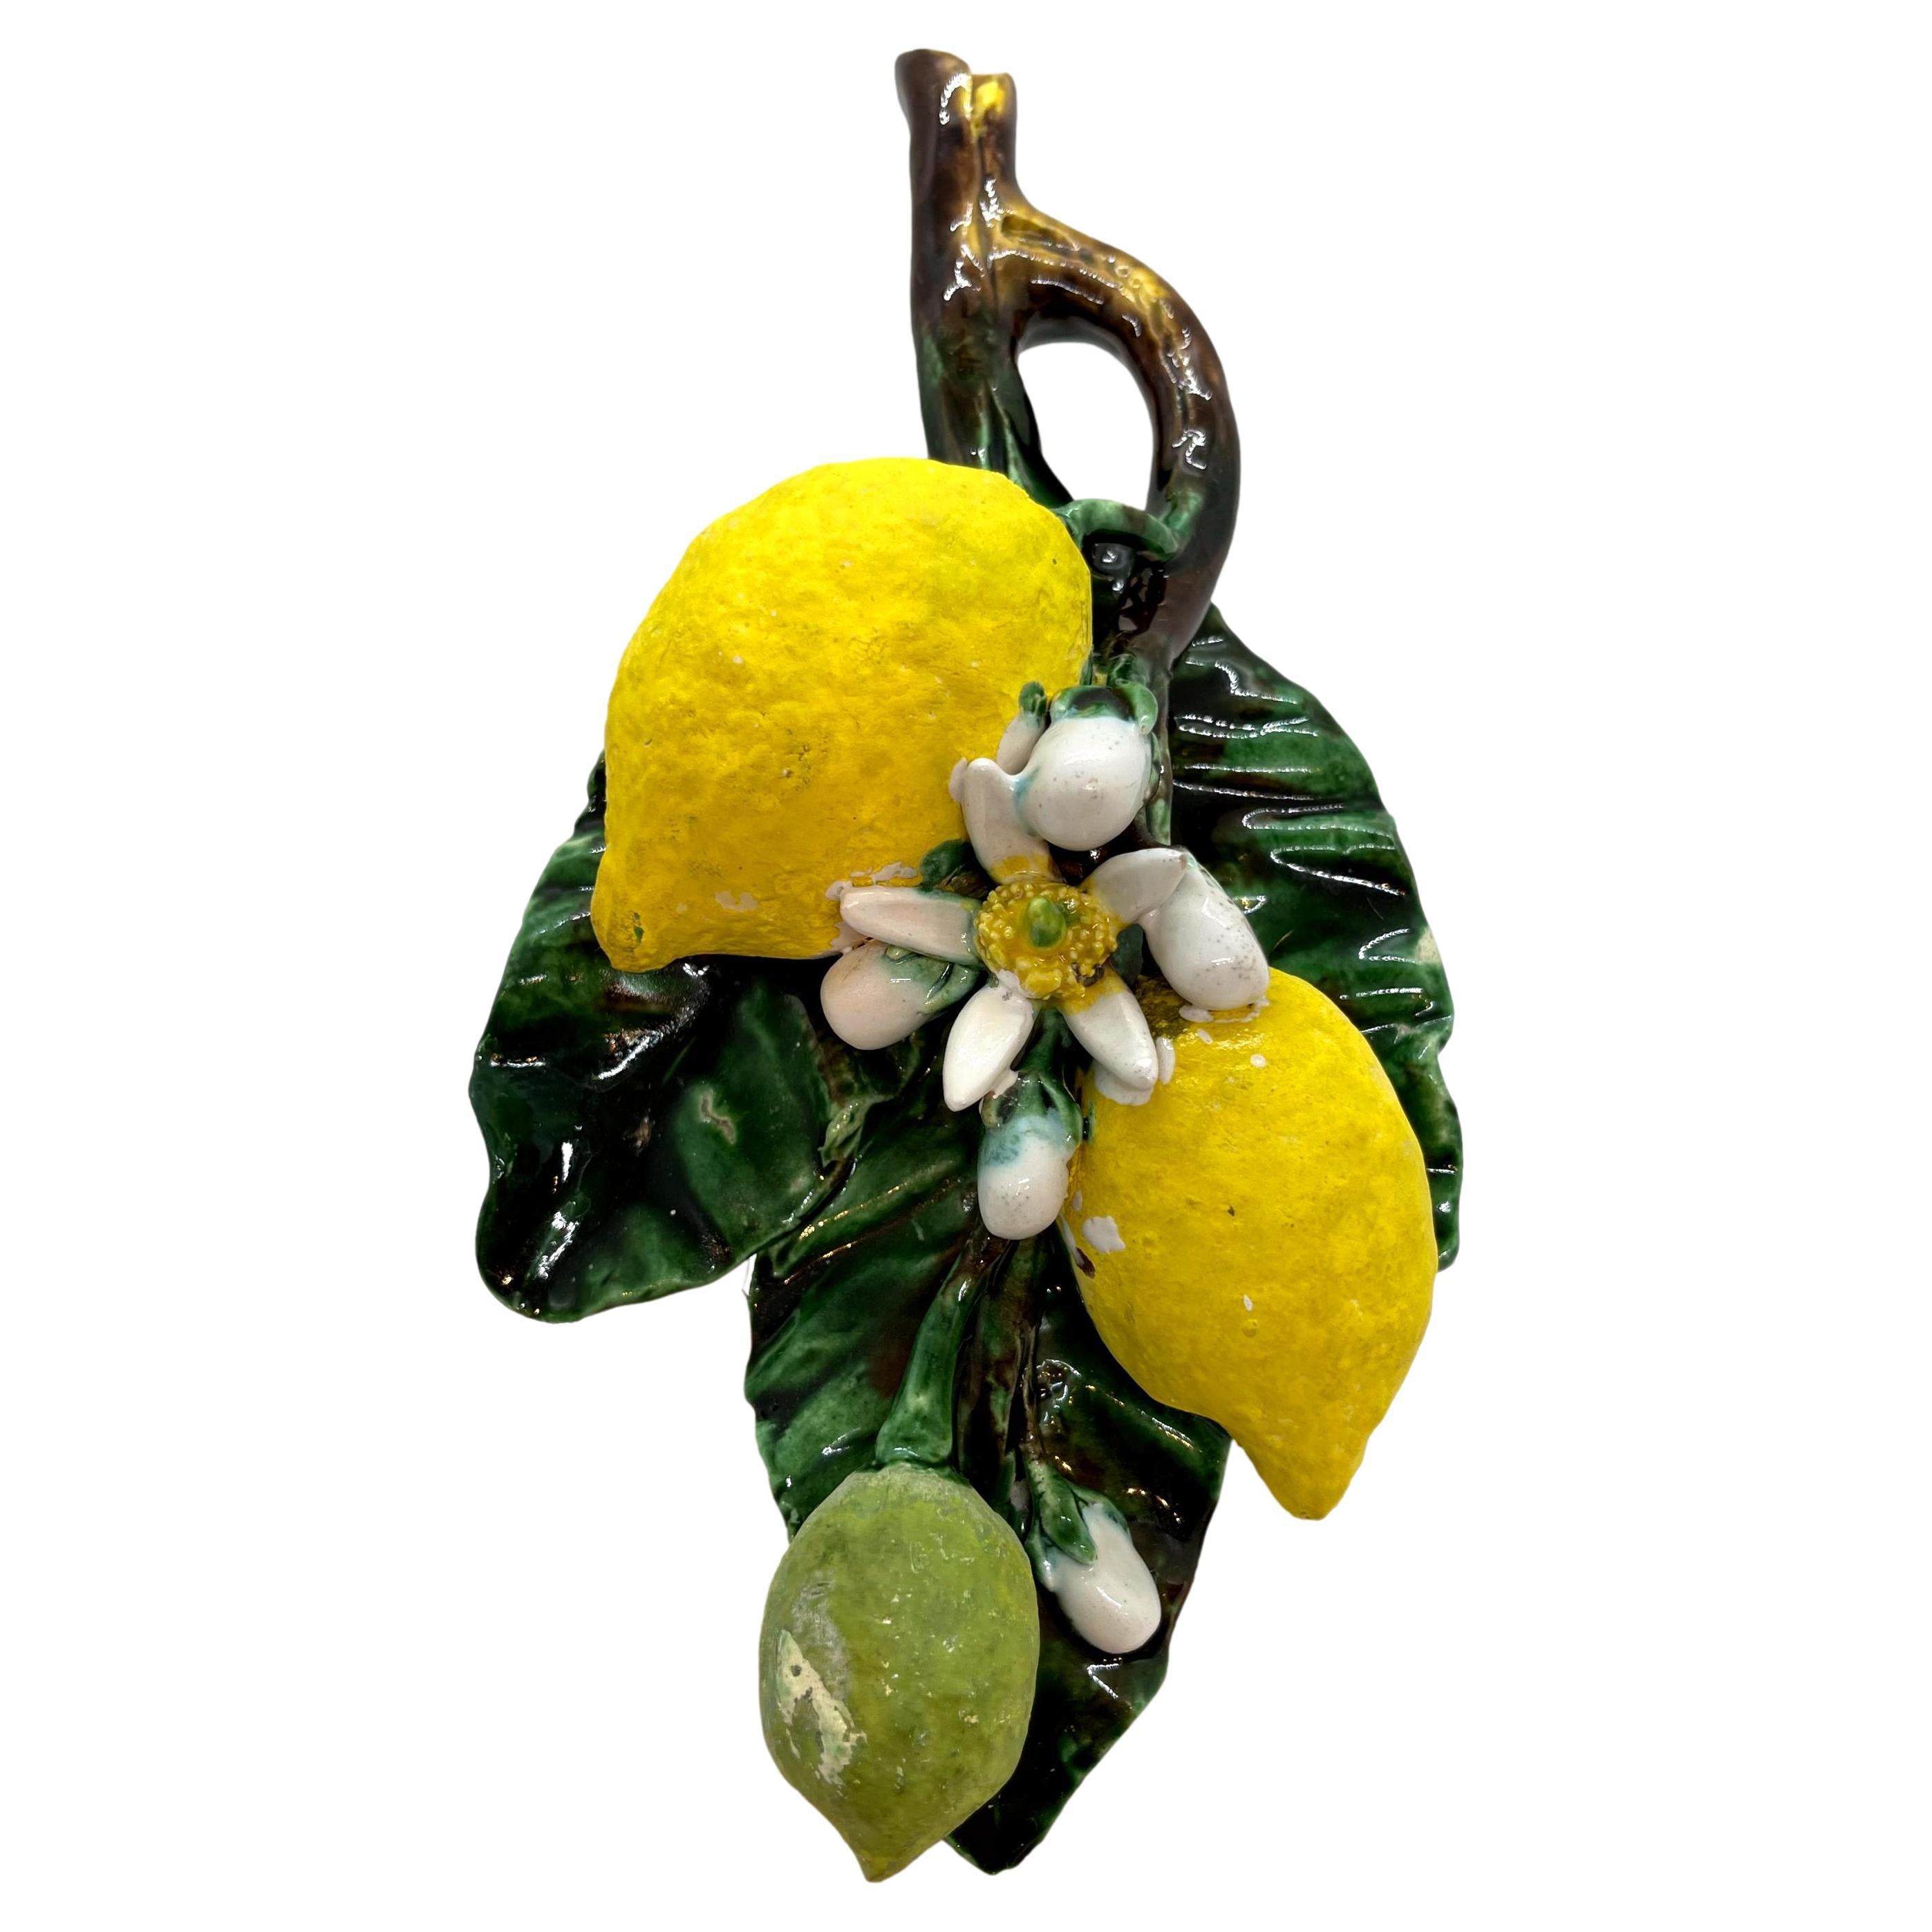 French Majolica Trompe L'oeil Wall Plaque with Lemons, Perret-Gentil, Menton